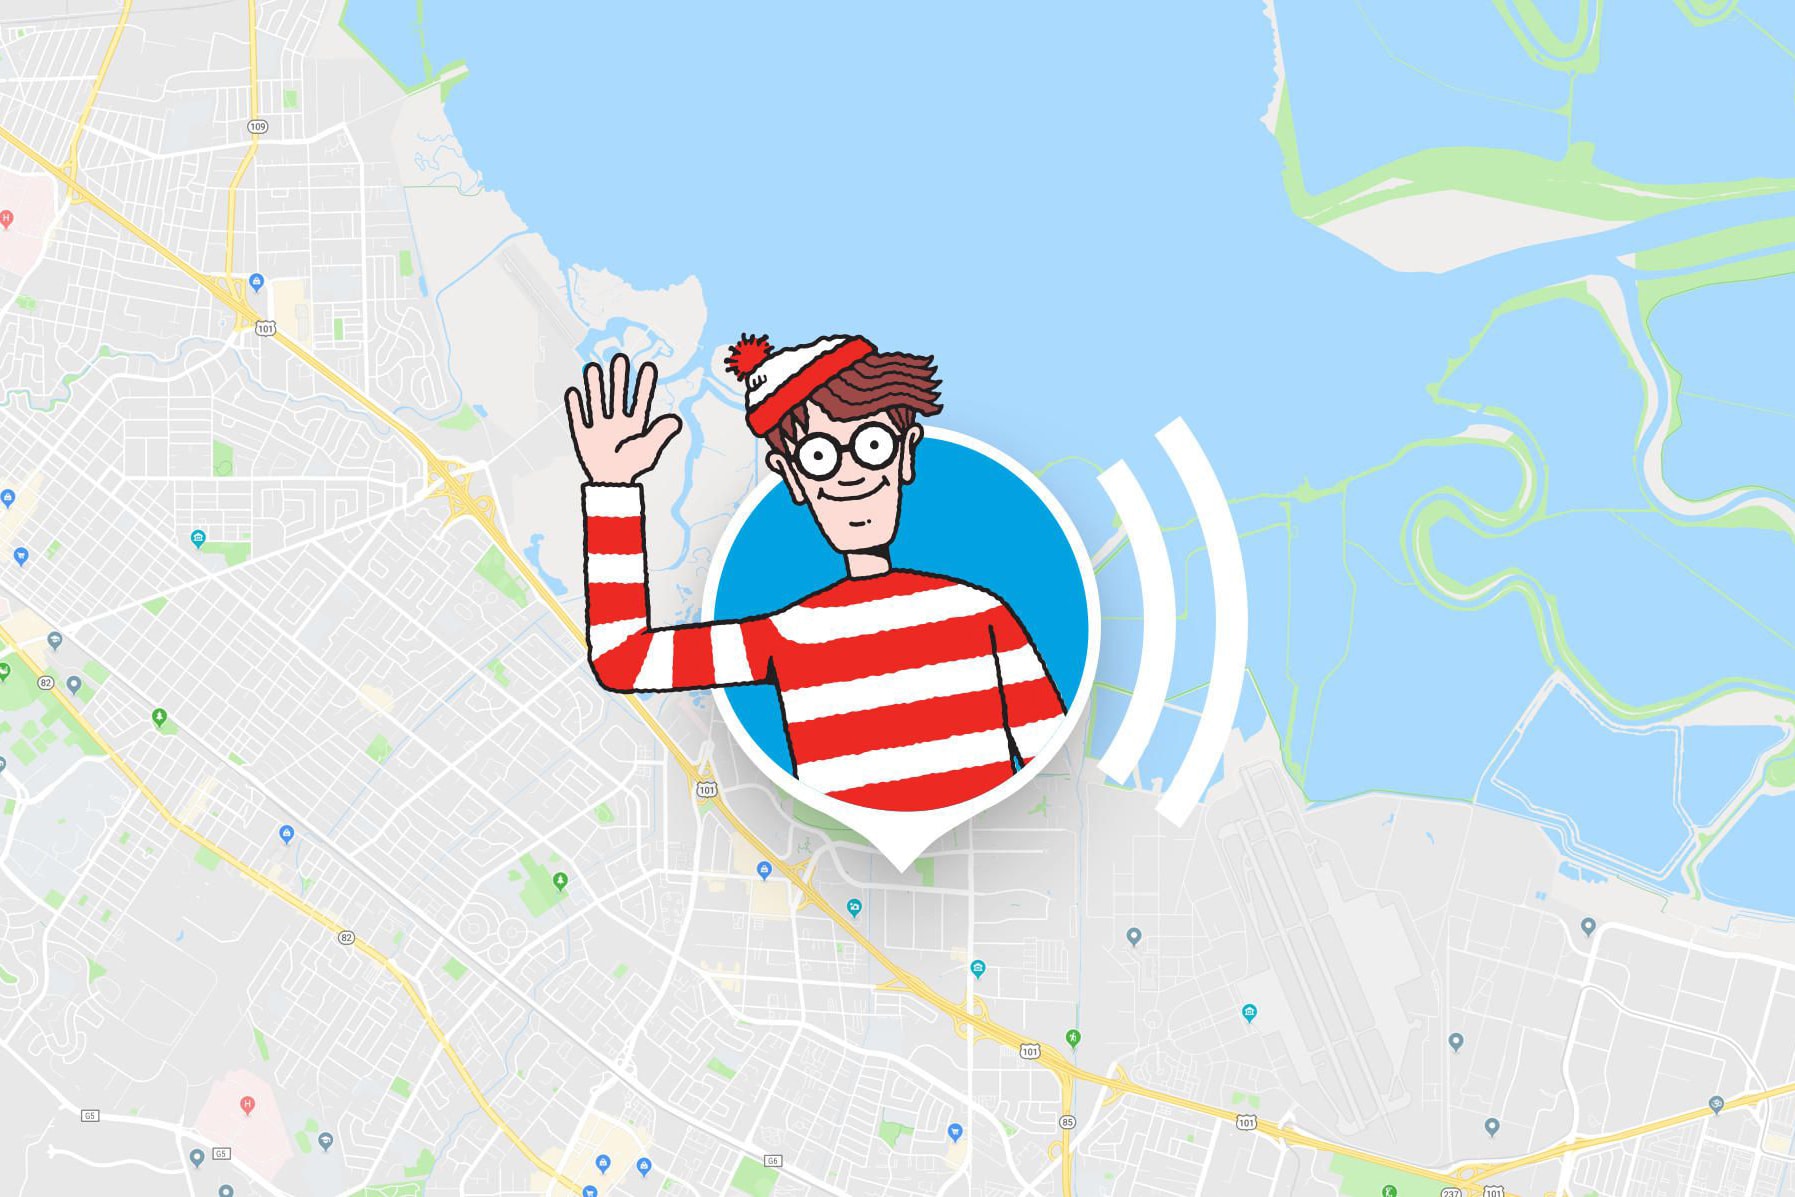 Google Maps Taps 'Where’s Waldo?' For April Fools' Day Applications App ios Apple iphone Android British Storybook Adventure globetrotter travel Wenda Woof Wizard Whitebeard Odlaw